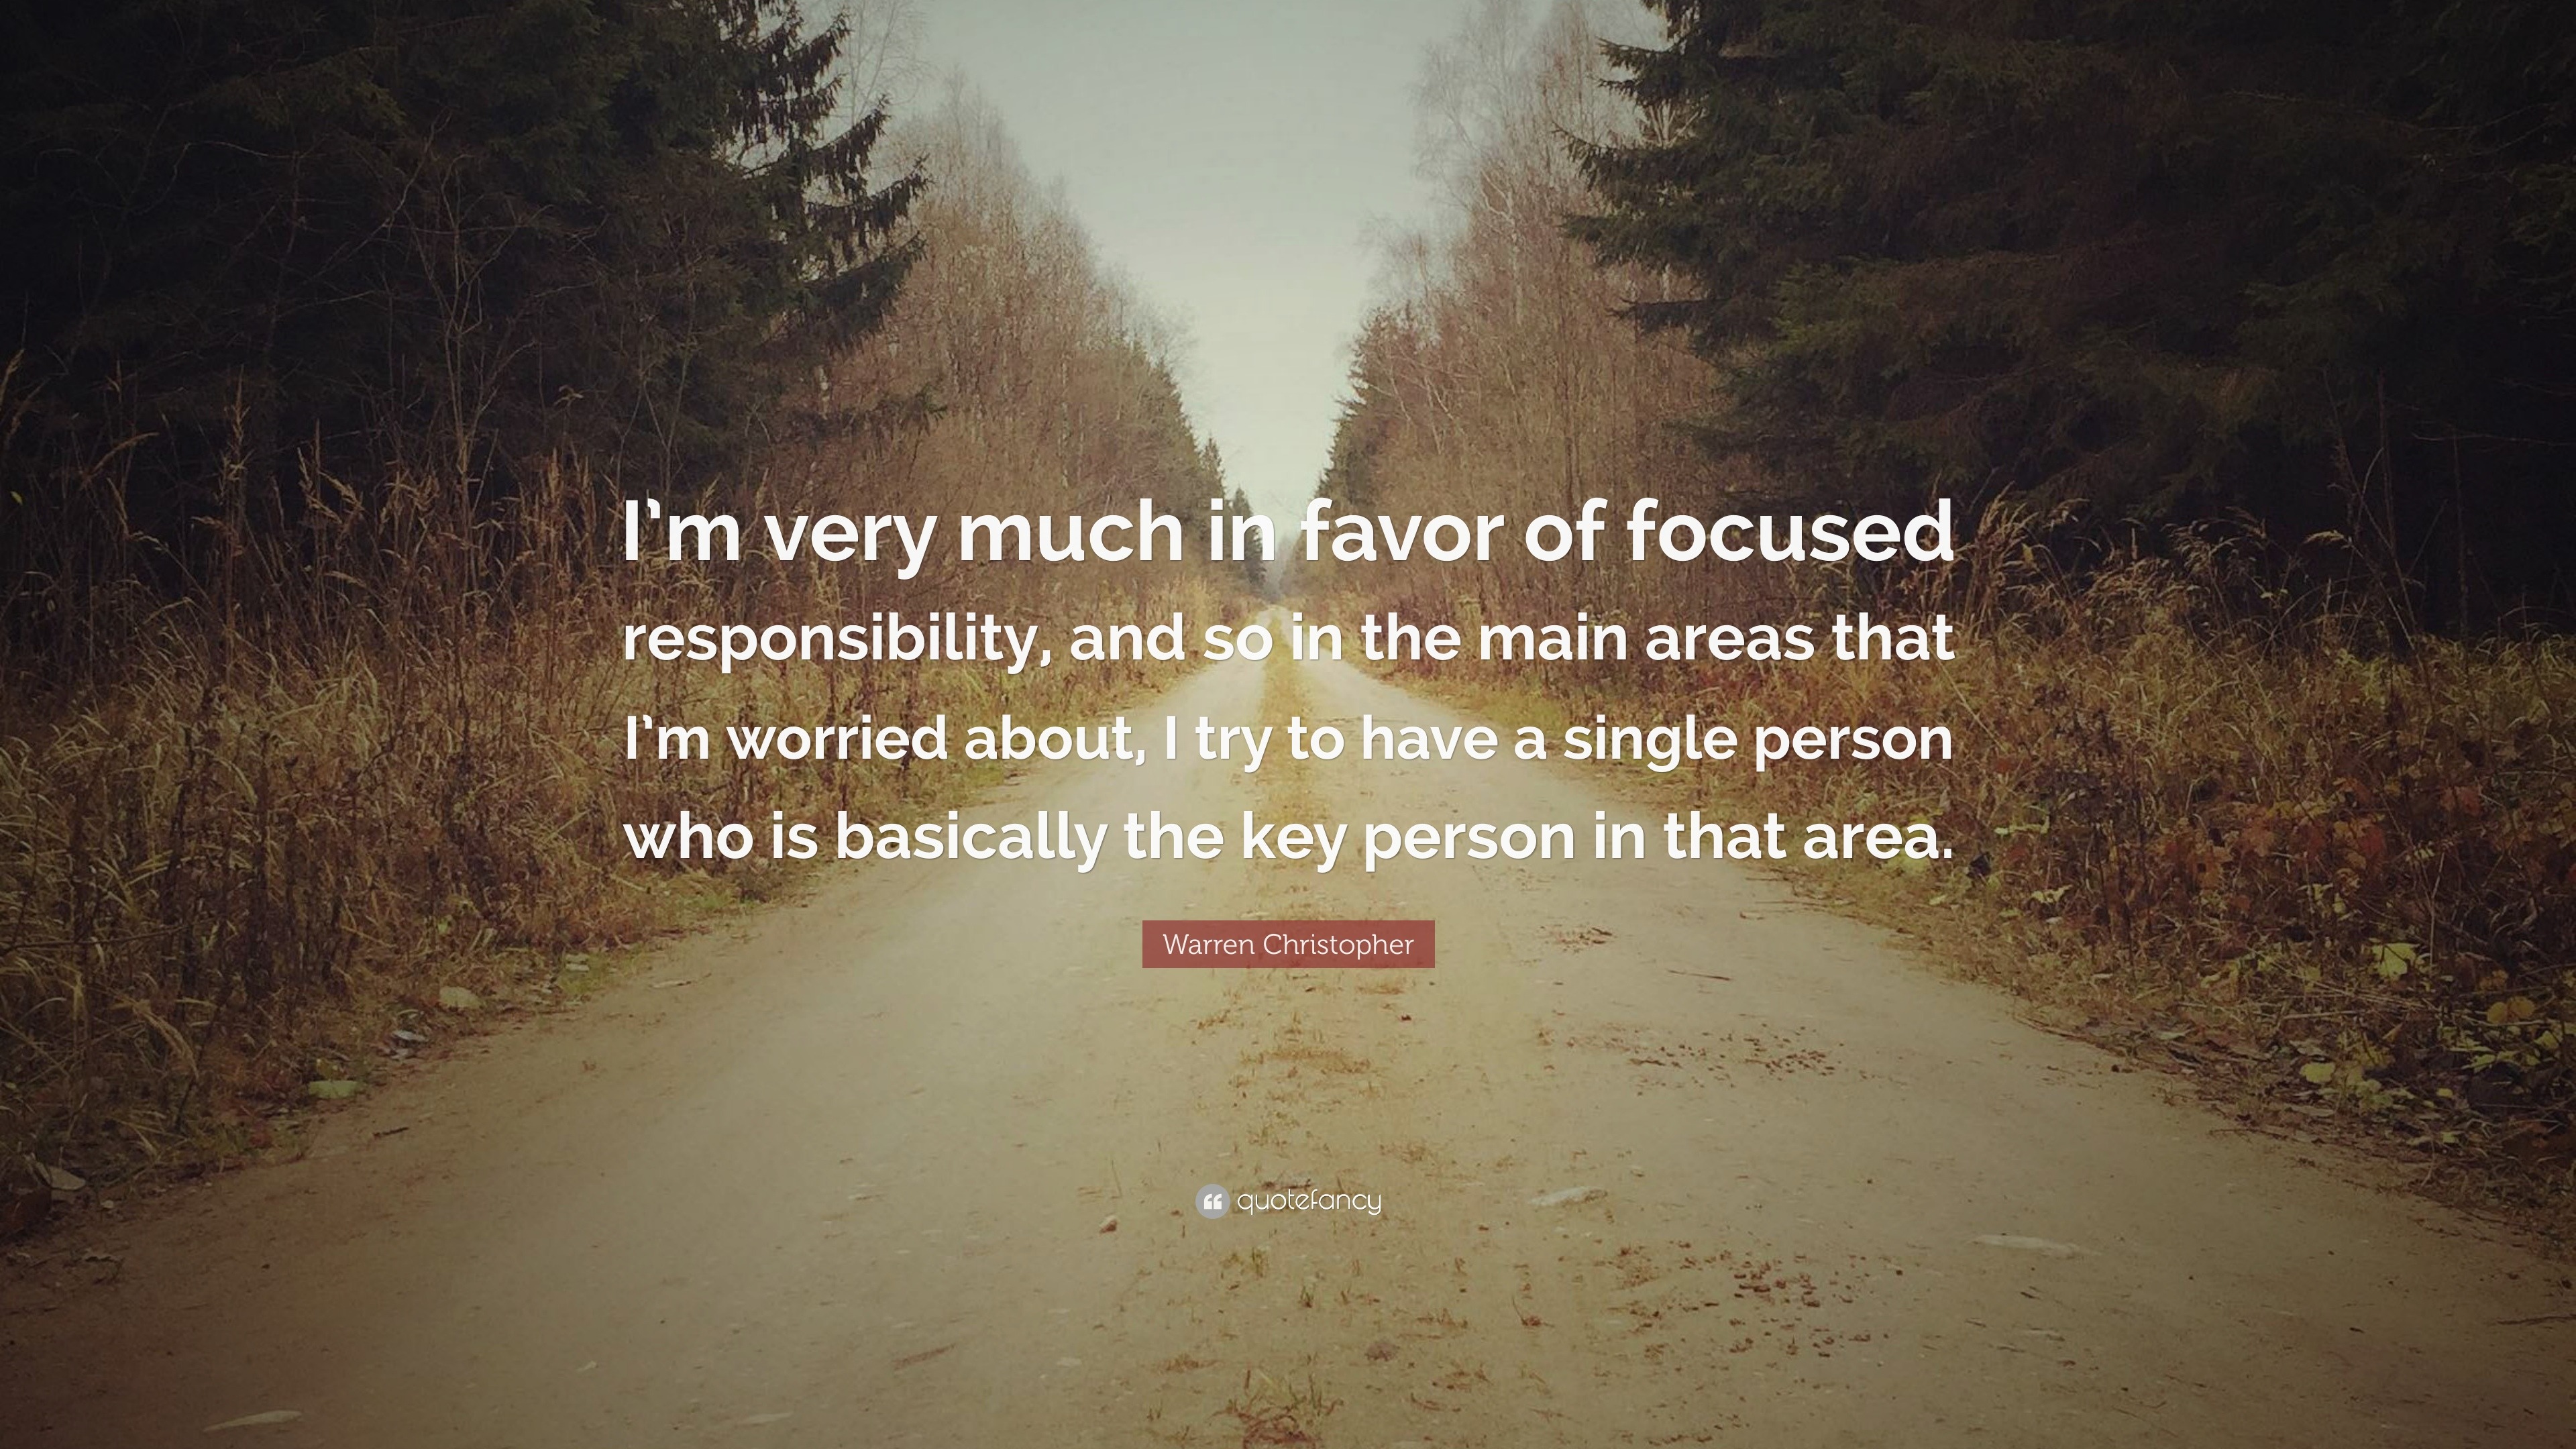 Warren Christopher Quote: “I’m very much in favor of focused ...